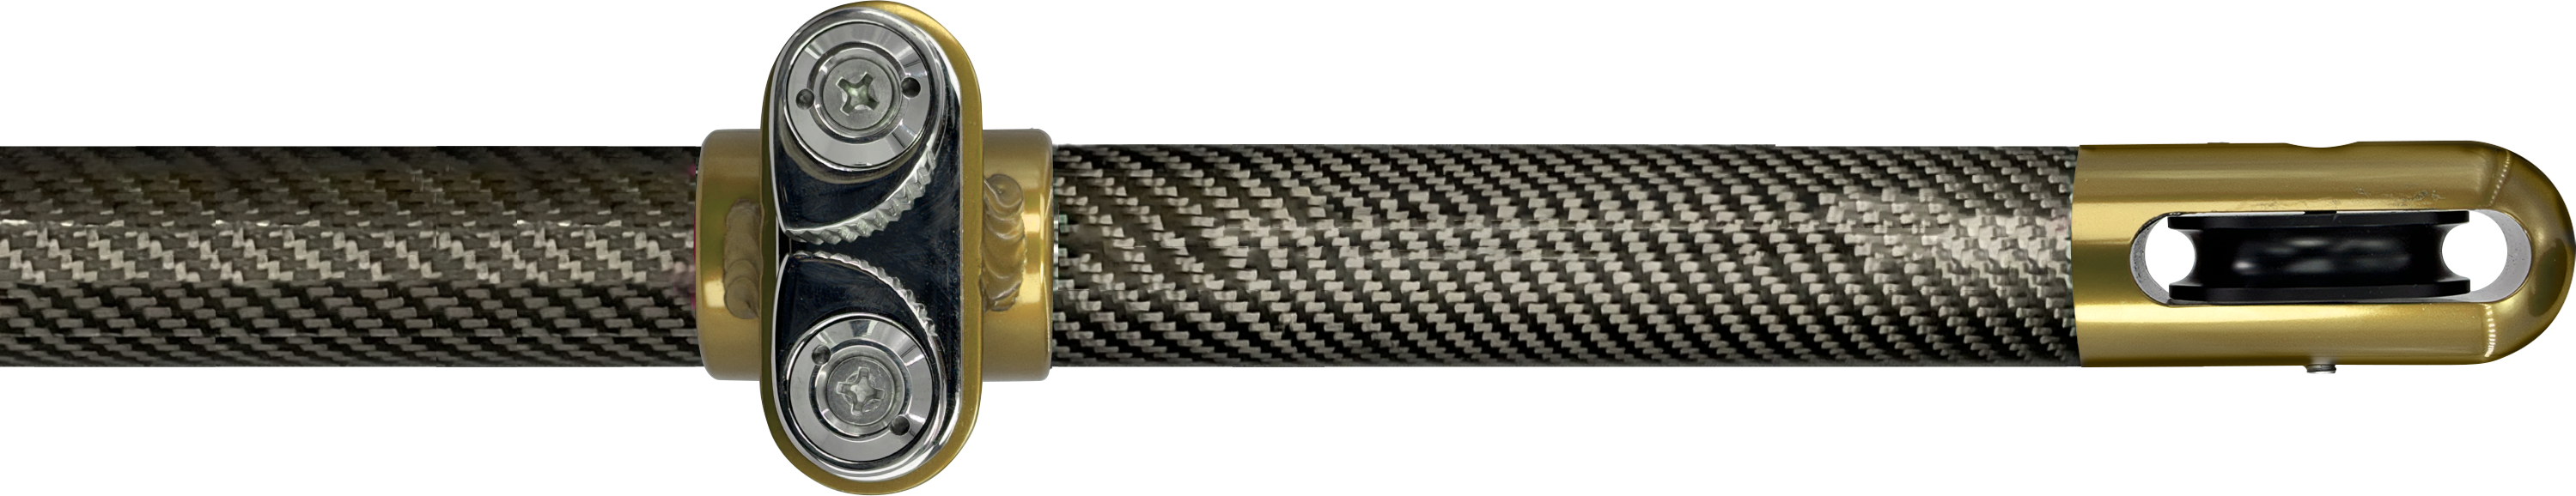 carbon fiber sunfly shade pole gold anodized